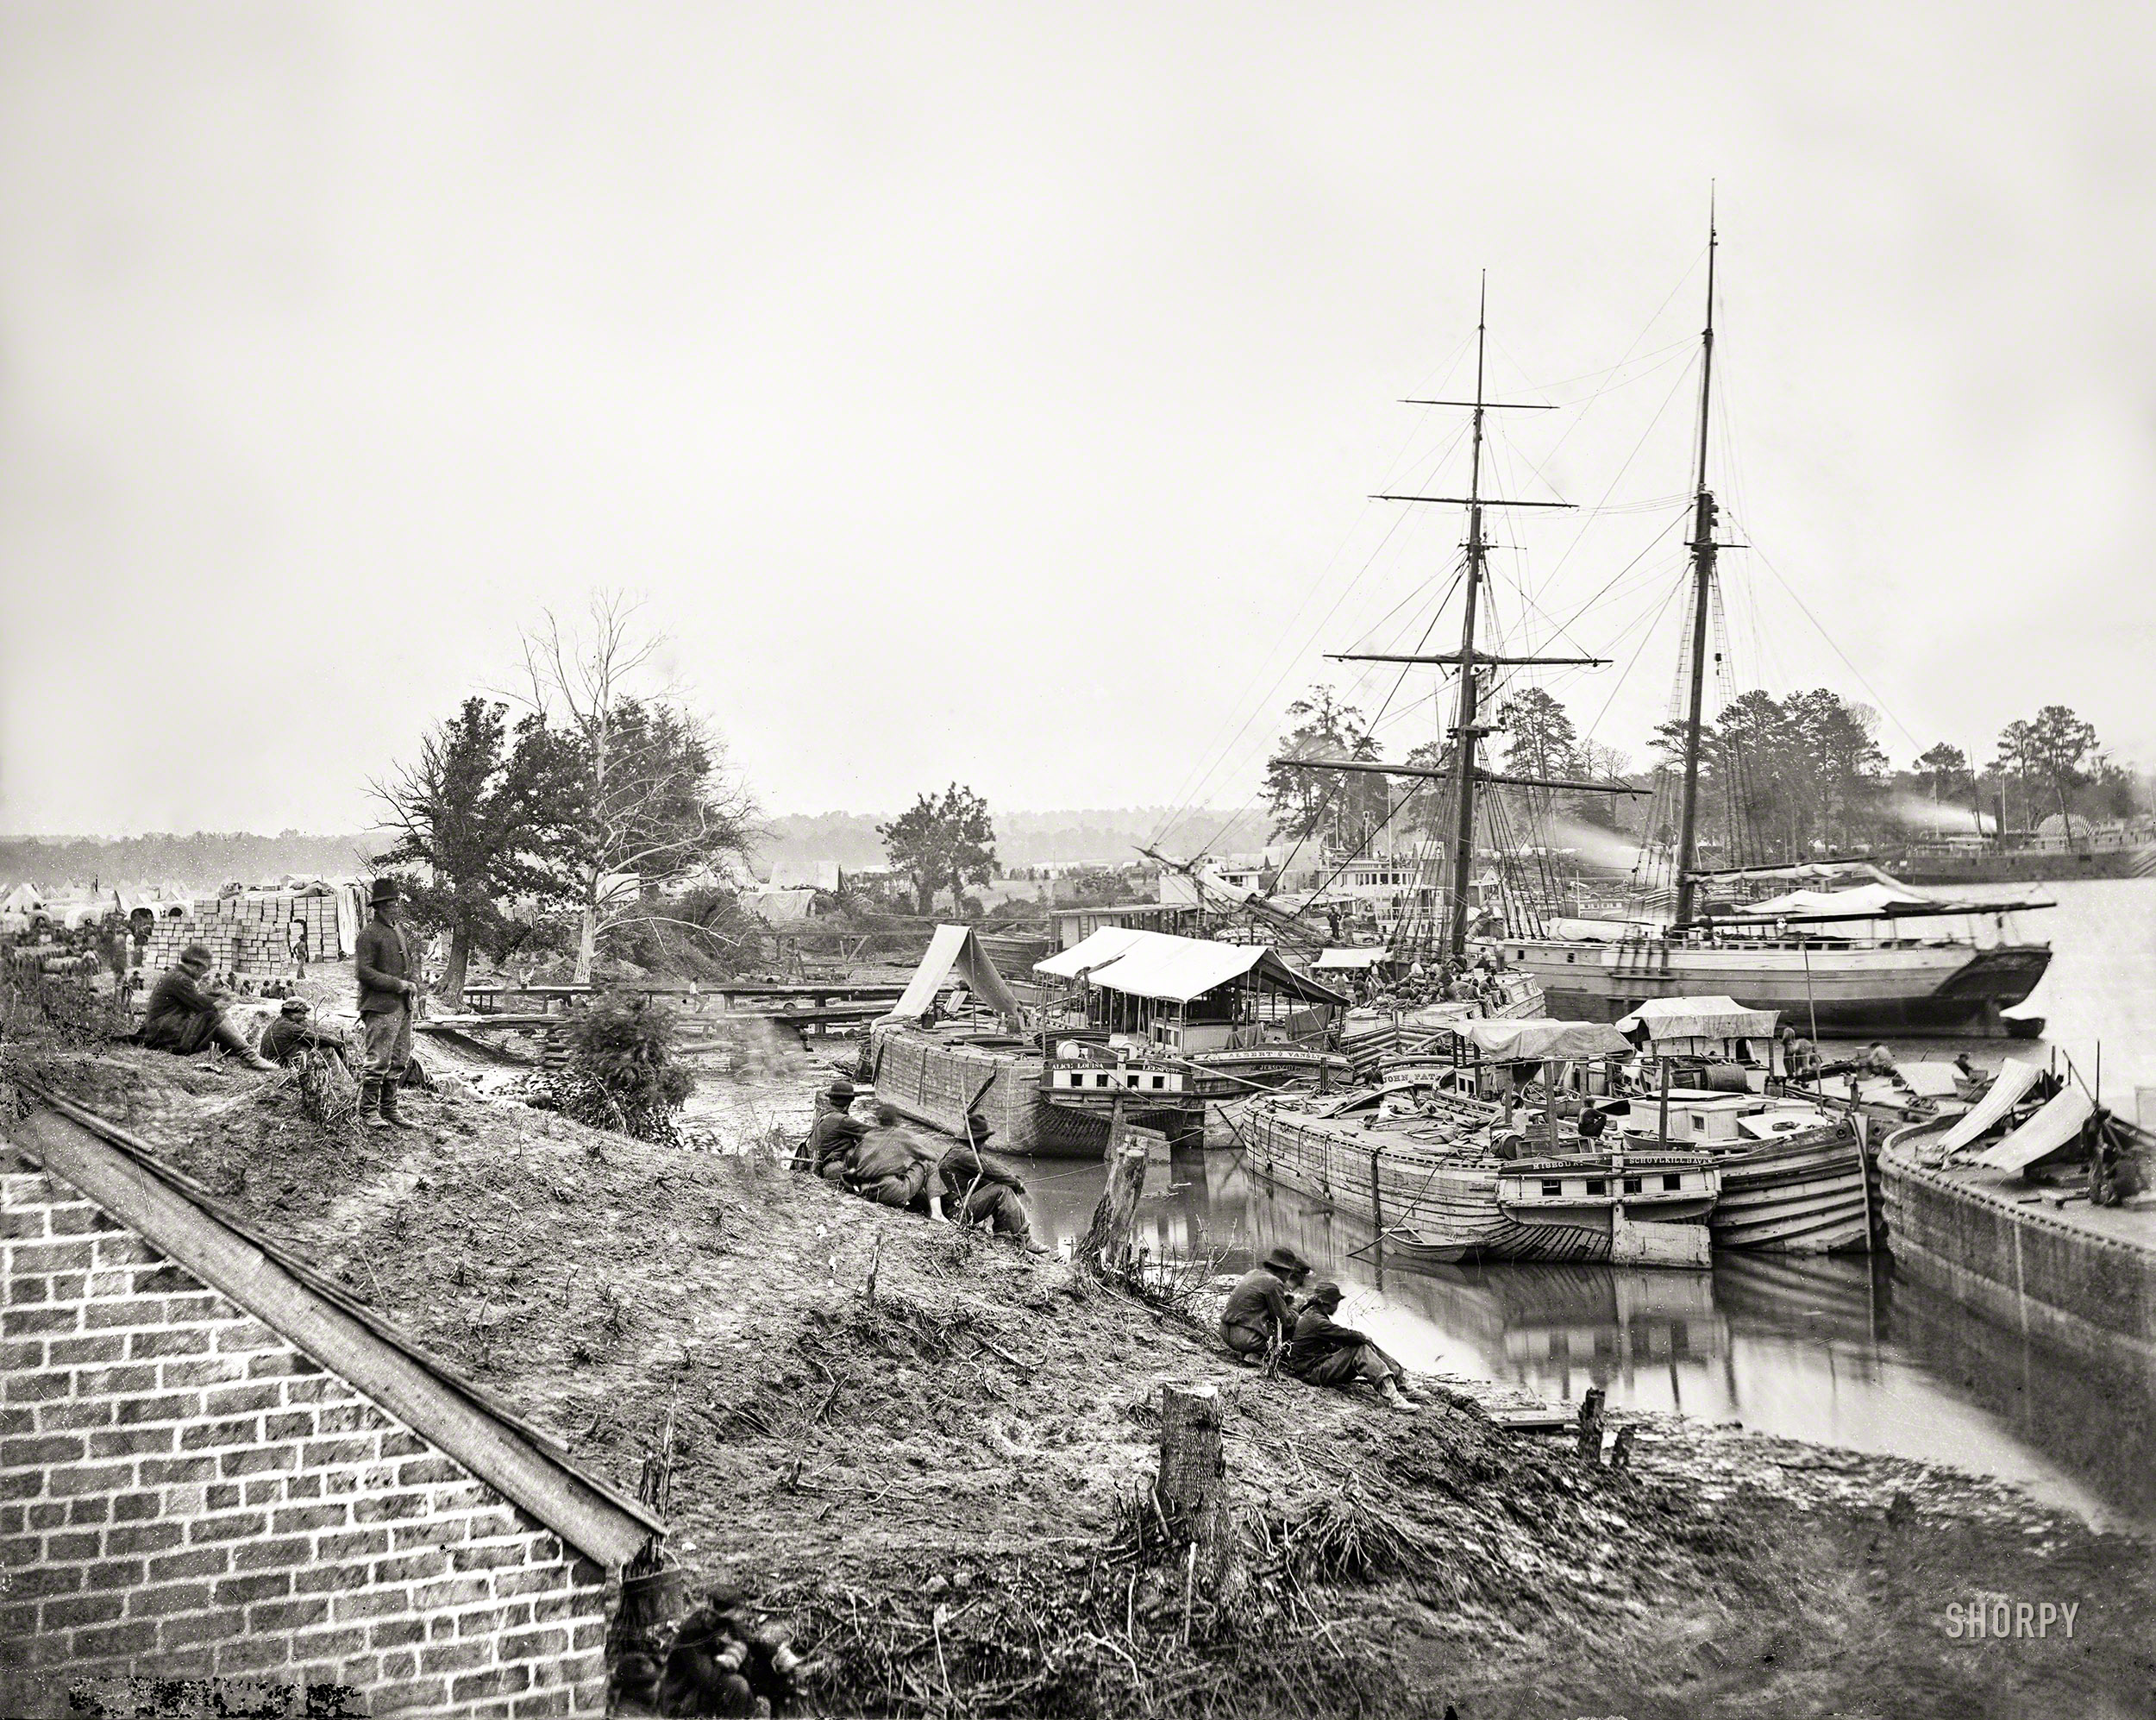 1862. "White House Landing, Virginia. Federal supply vessels at anchor." Wet plate negative from photographs of the main Eastern theater of war -- the Peninsular Campaign, May-August 1862. View full size.